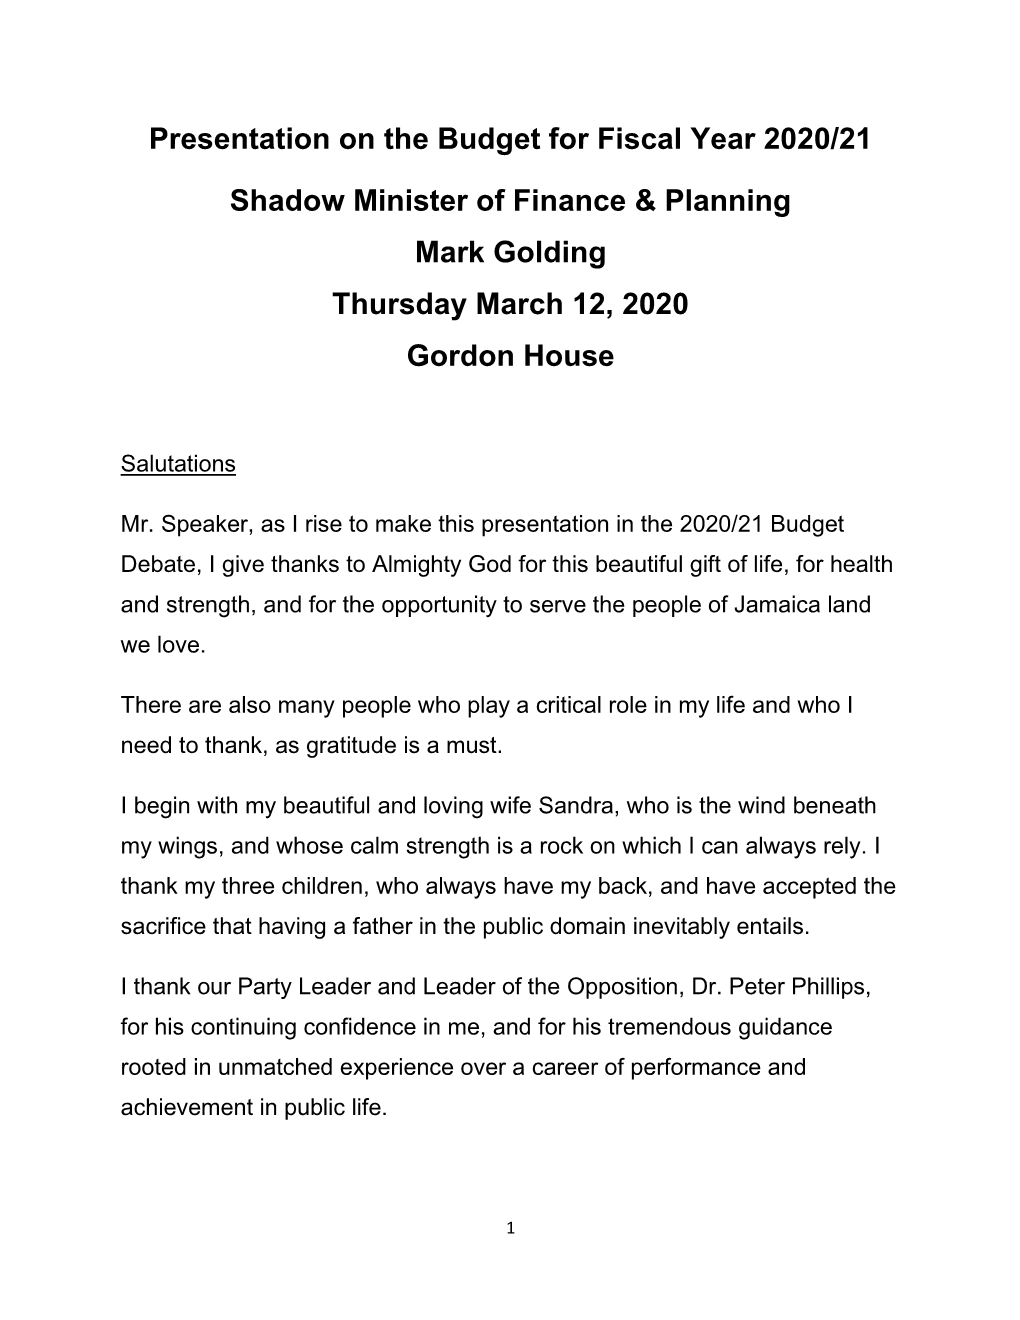 Presentation on the Budget for Fiscal Year 2020/21 Shadow Minister Of